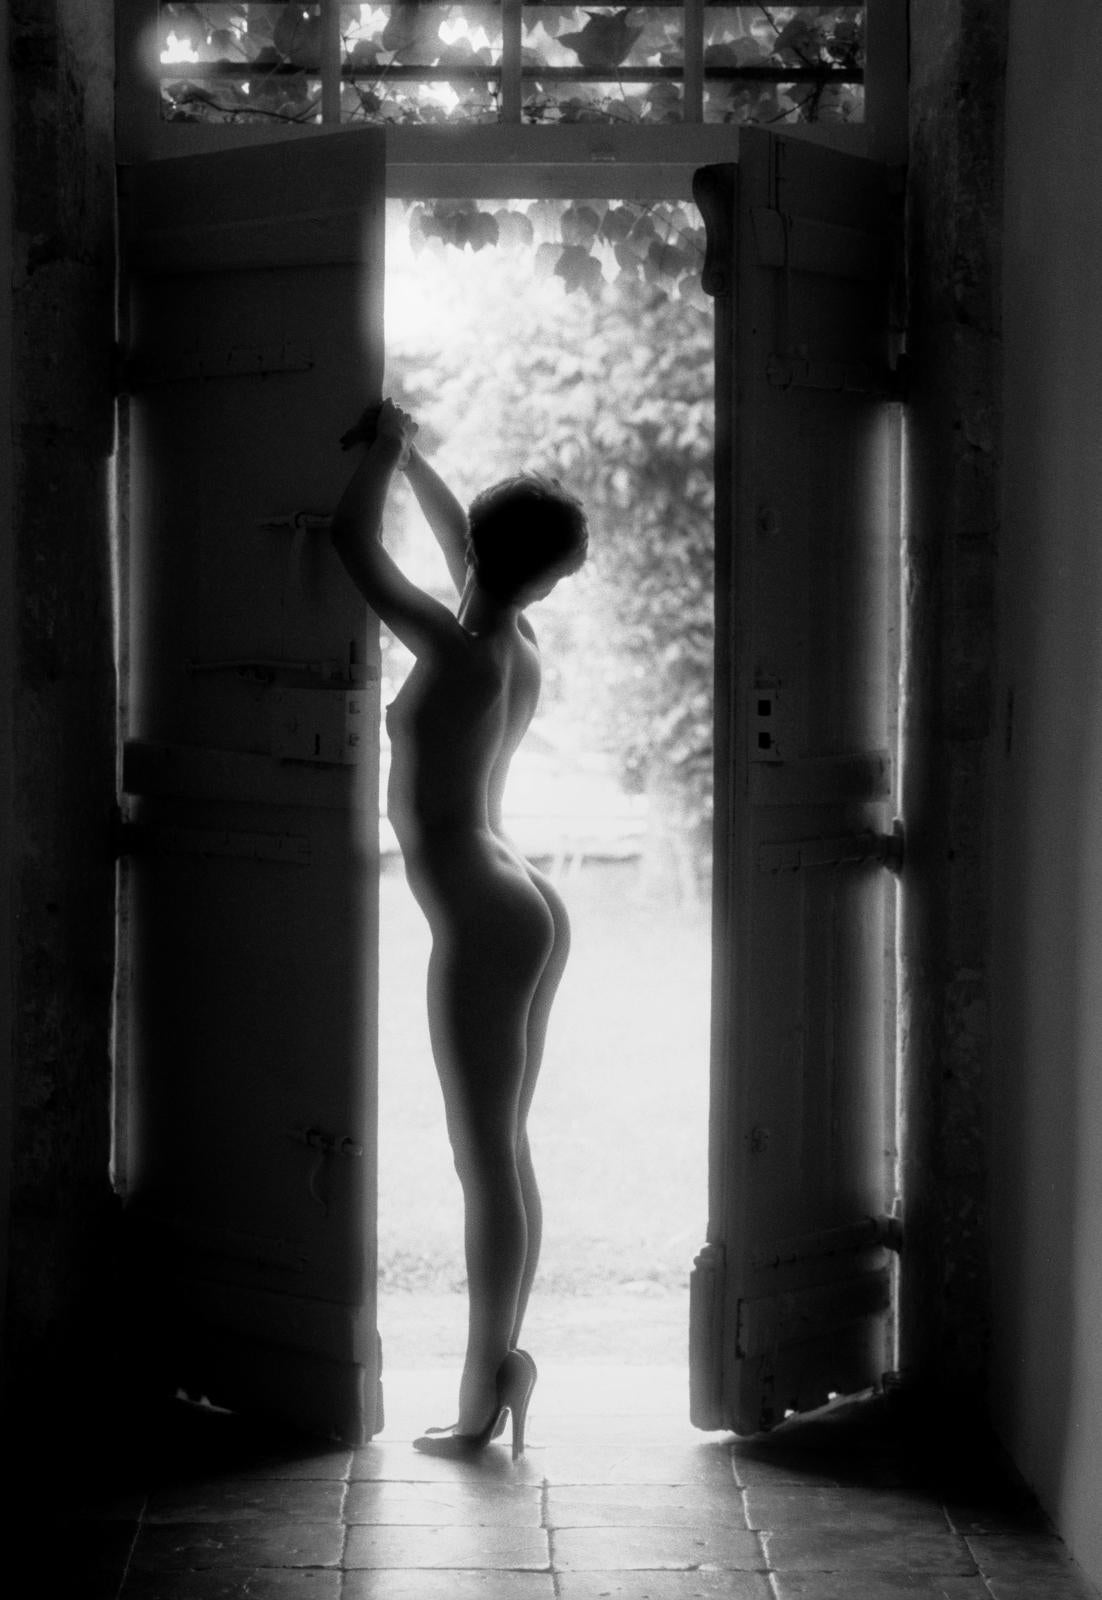 Lisa - Signed limited edition archival pigment print  , Edition of 10
Morning light in Bordeaux, France.     Lisa posed in the doorway of an old farmhouse

Ian Sanderson rented a castle near Bordeaux in France, surrounded by vineyards, for a long